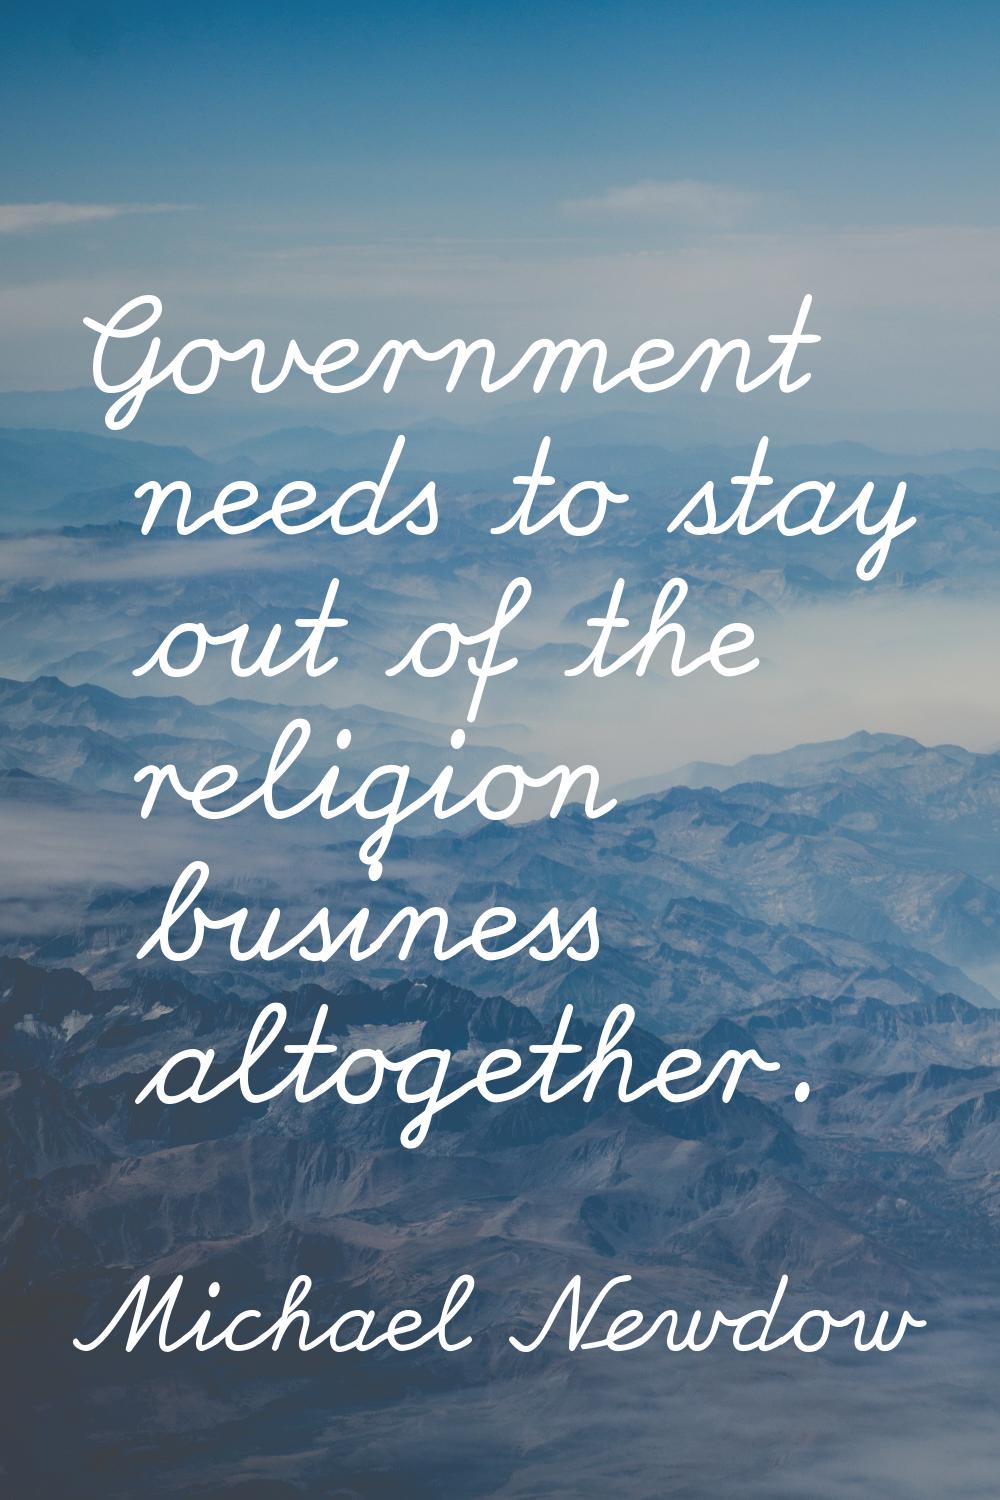 Government needs to stay out of the religion business altogether.